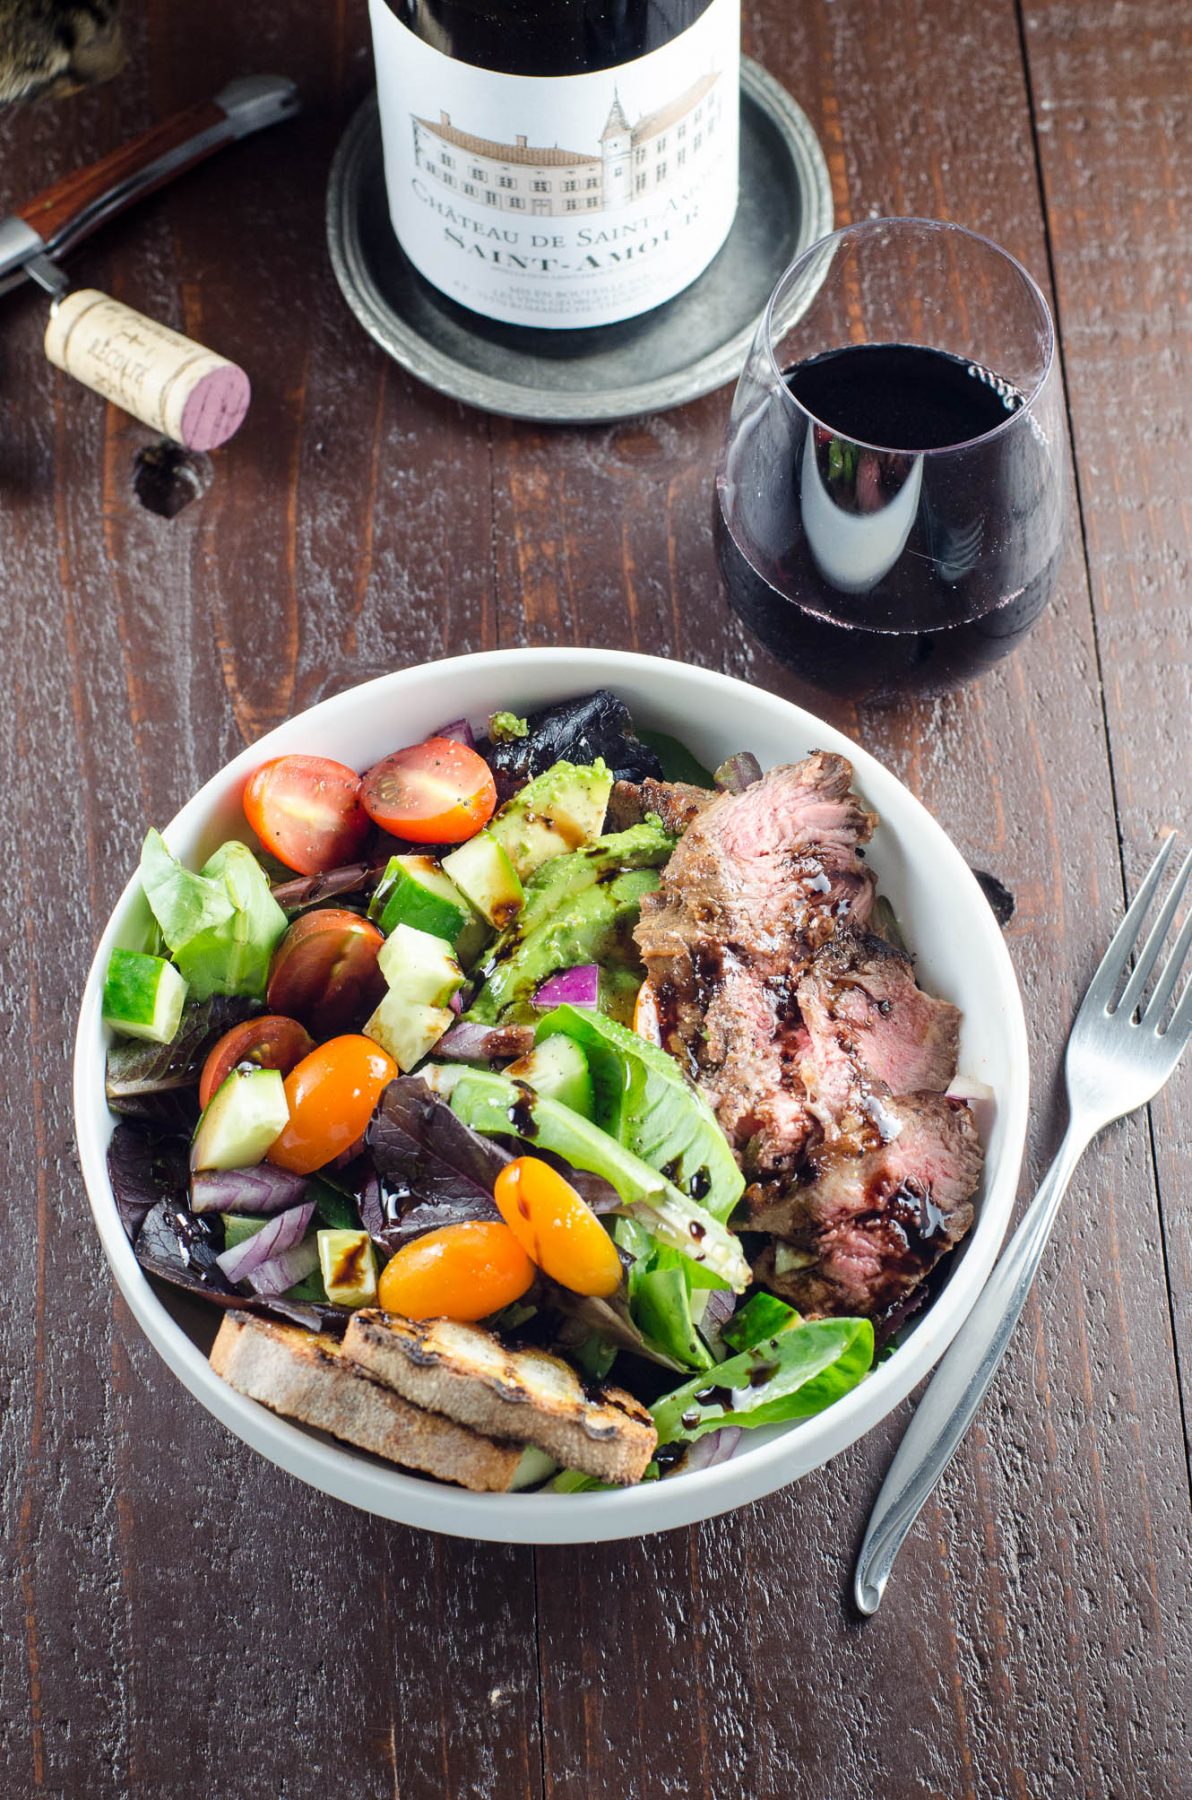 Grilled Steak Salad and Beaujolais Wine